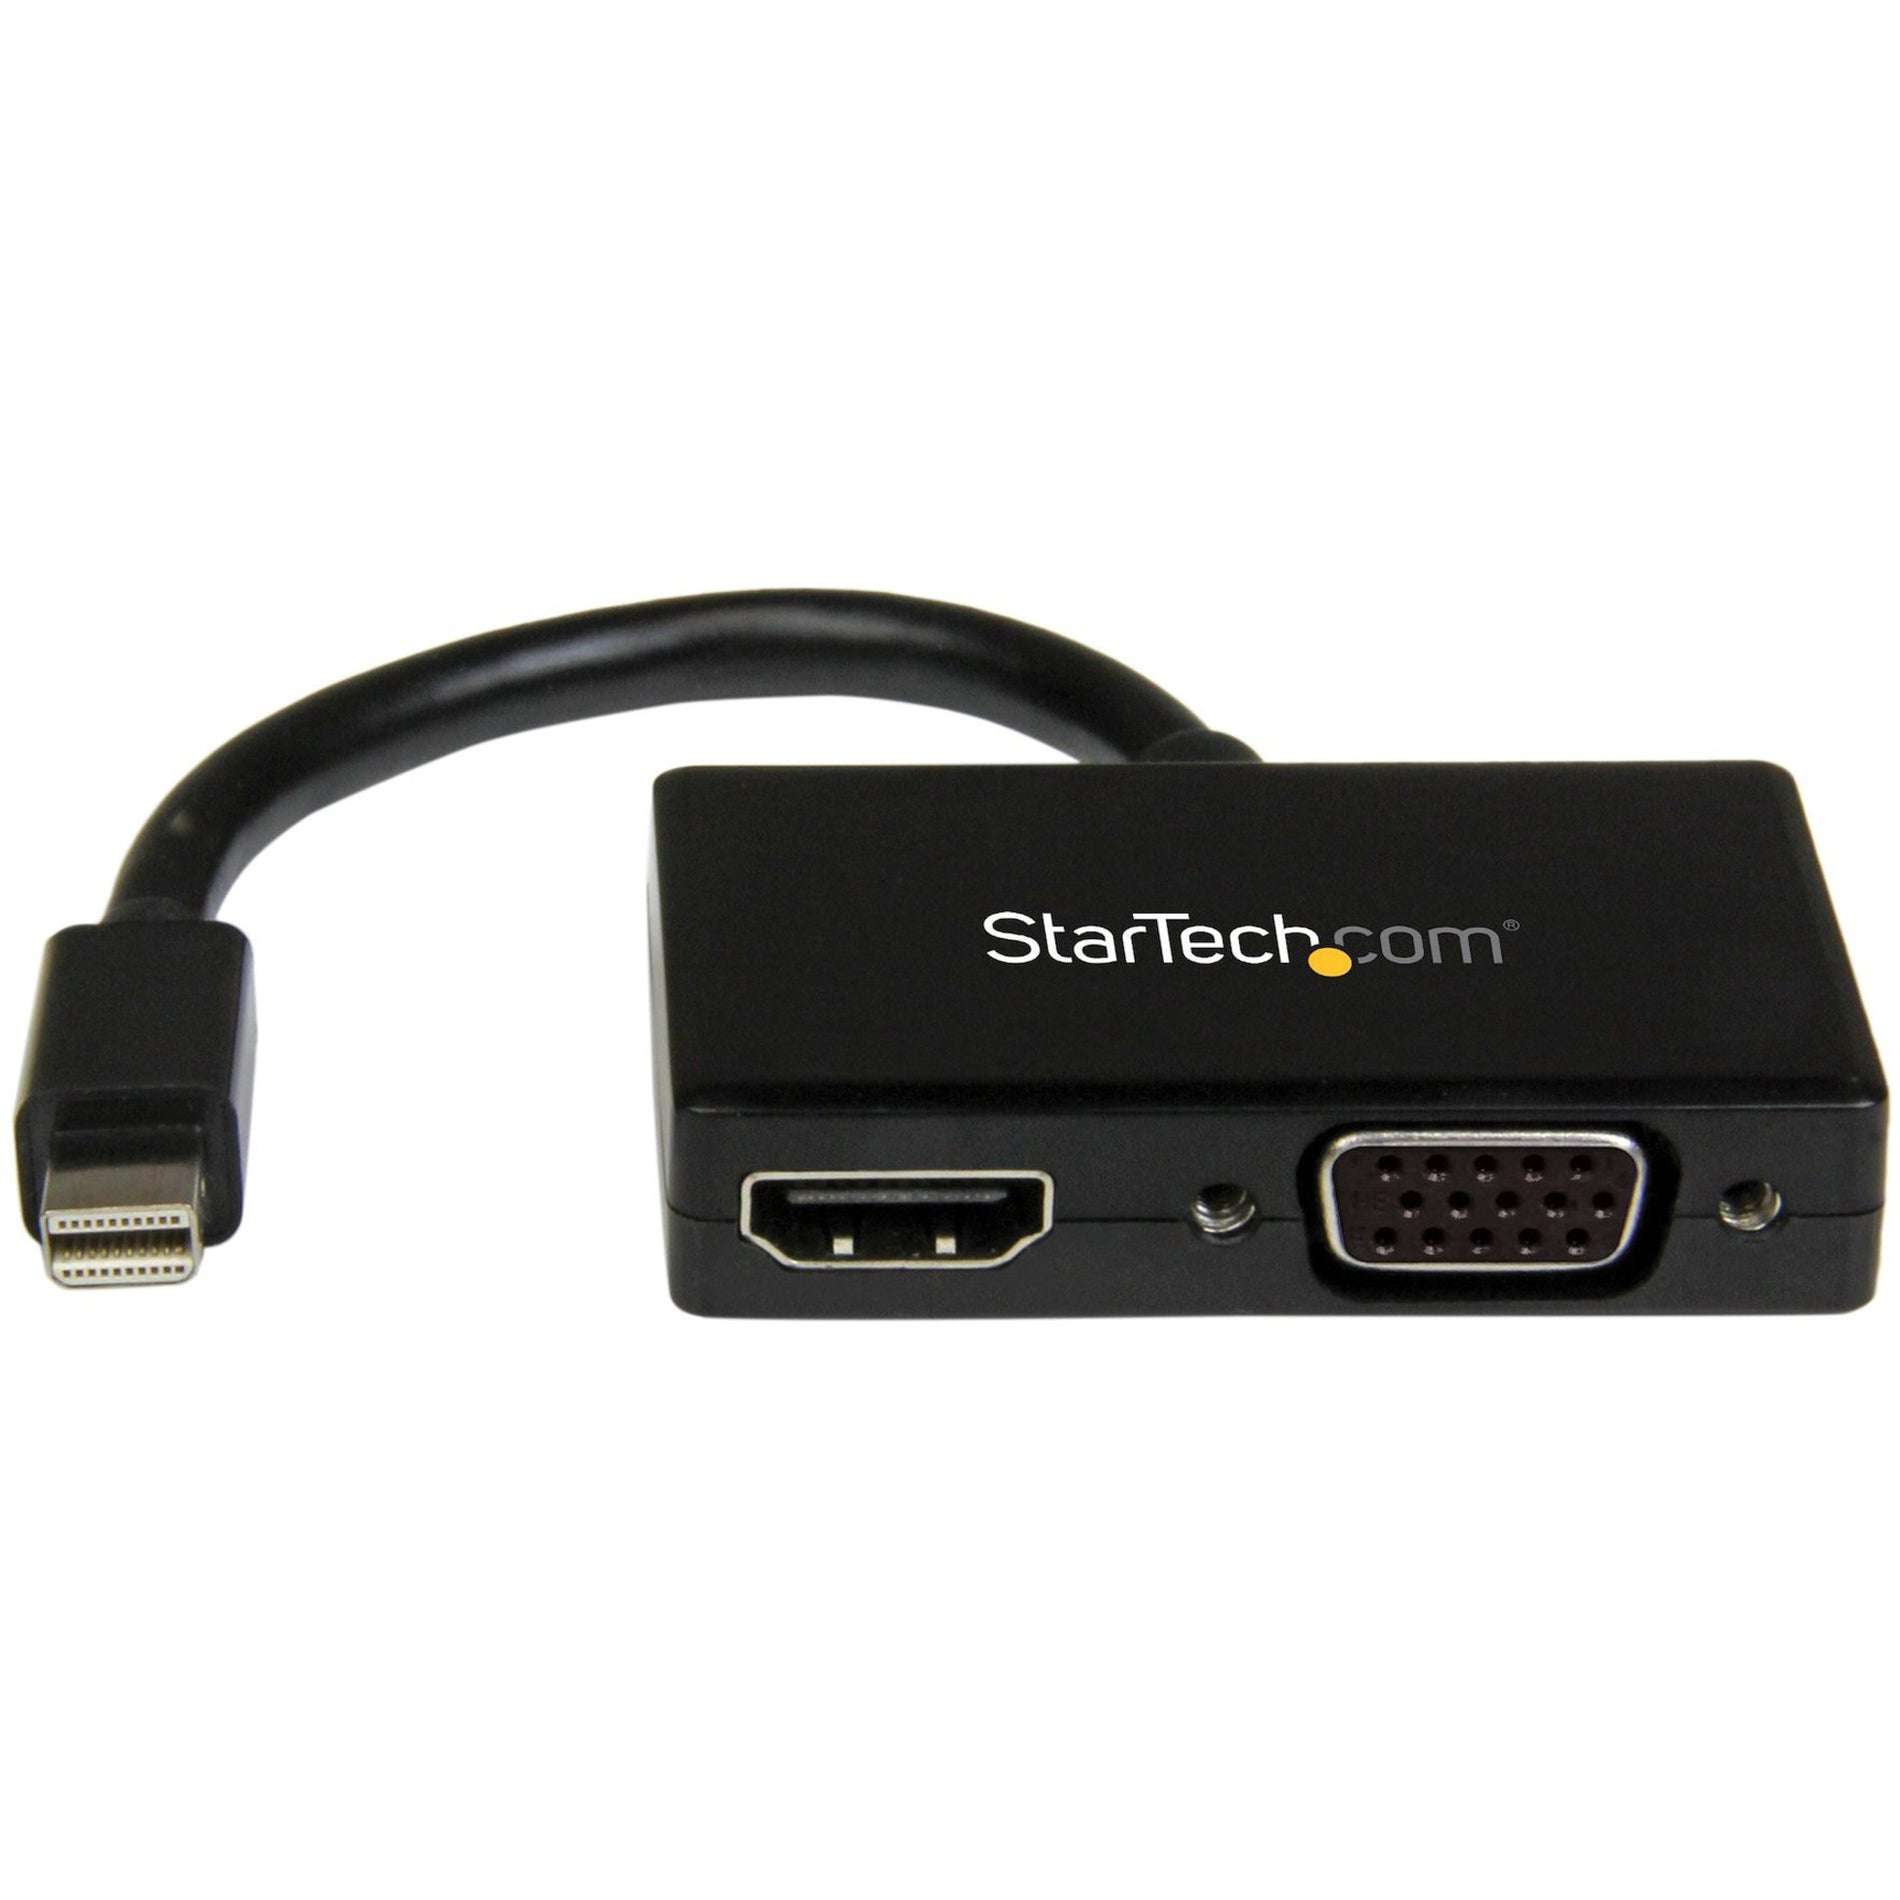 StarTech.com MDP2HDVGA Travel A/V Adapter: 2-in-1 Mini DisplayPort to HDMI or VGA Converter, Active, 6" Cable Length